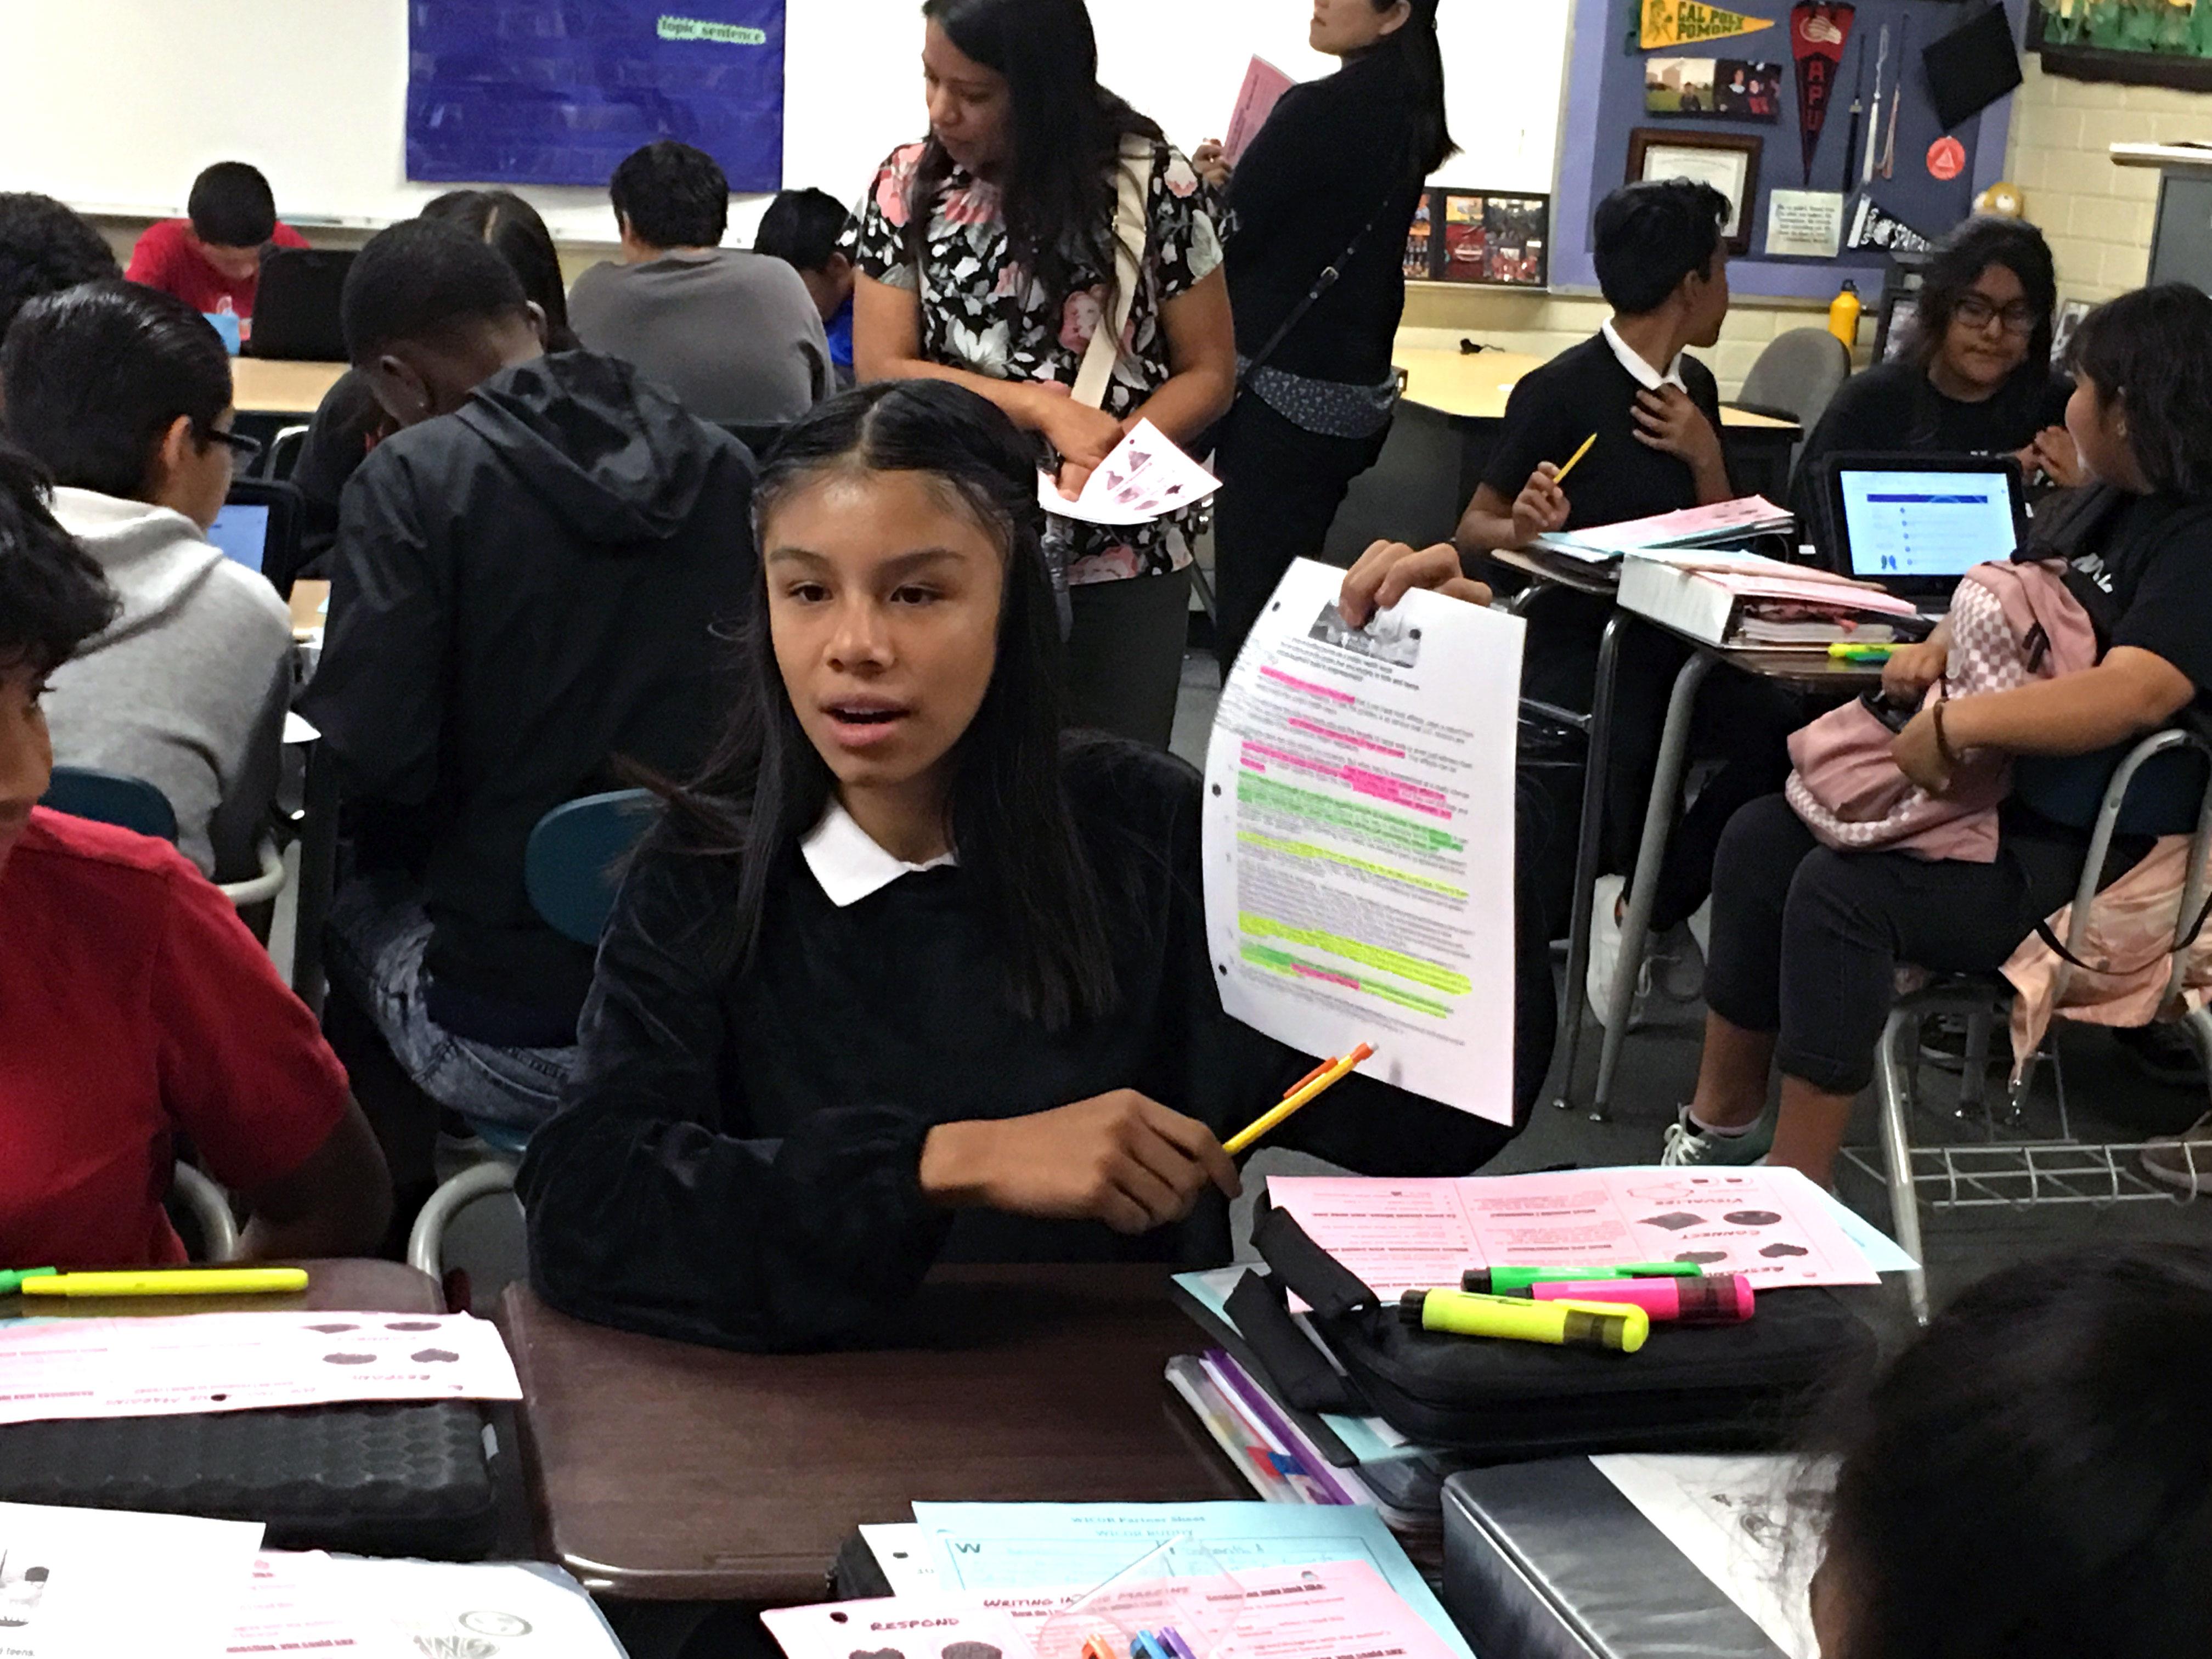 AVID Showcase - Principal Roddy Layton welcomes educators to visit classrooms at Simons Middle School. He is committed to ensuring that our AVID program continues to set standards.  #proud2bepusd #avidshowcase http://edl.io/n1111247